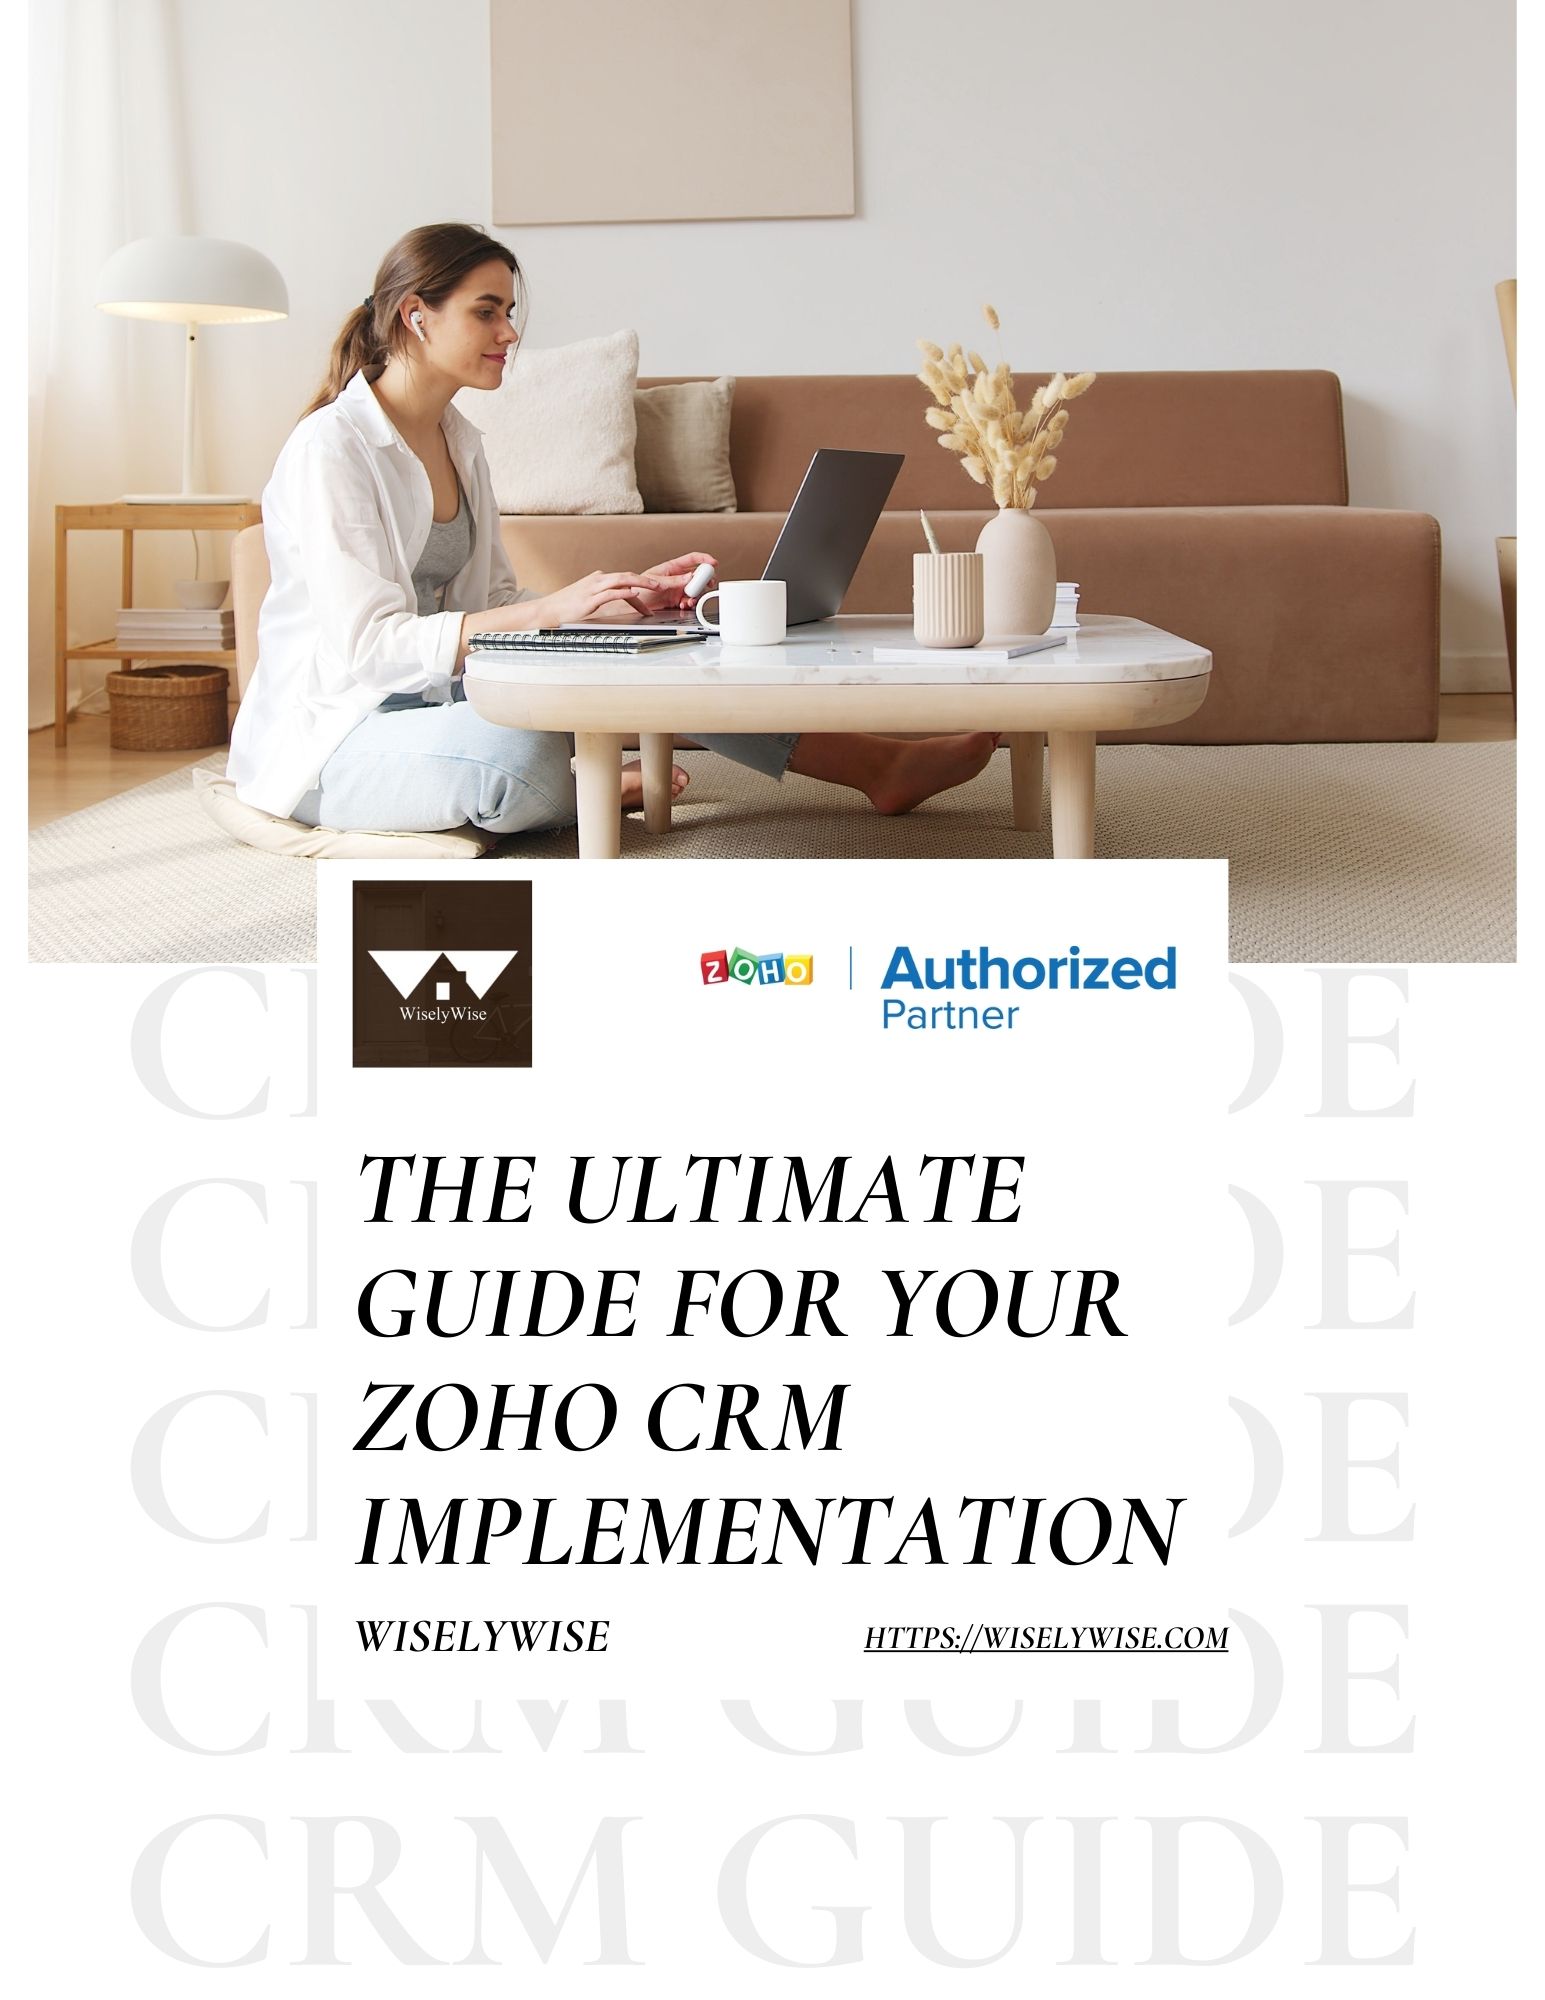 zoho crm implementation by wiselywise